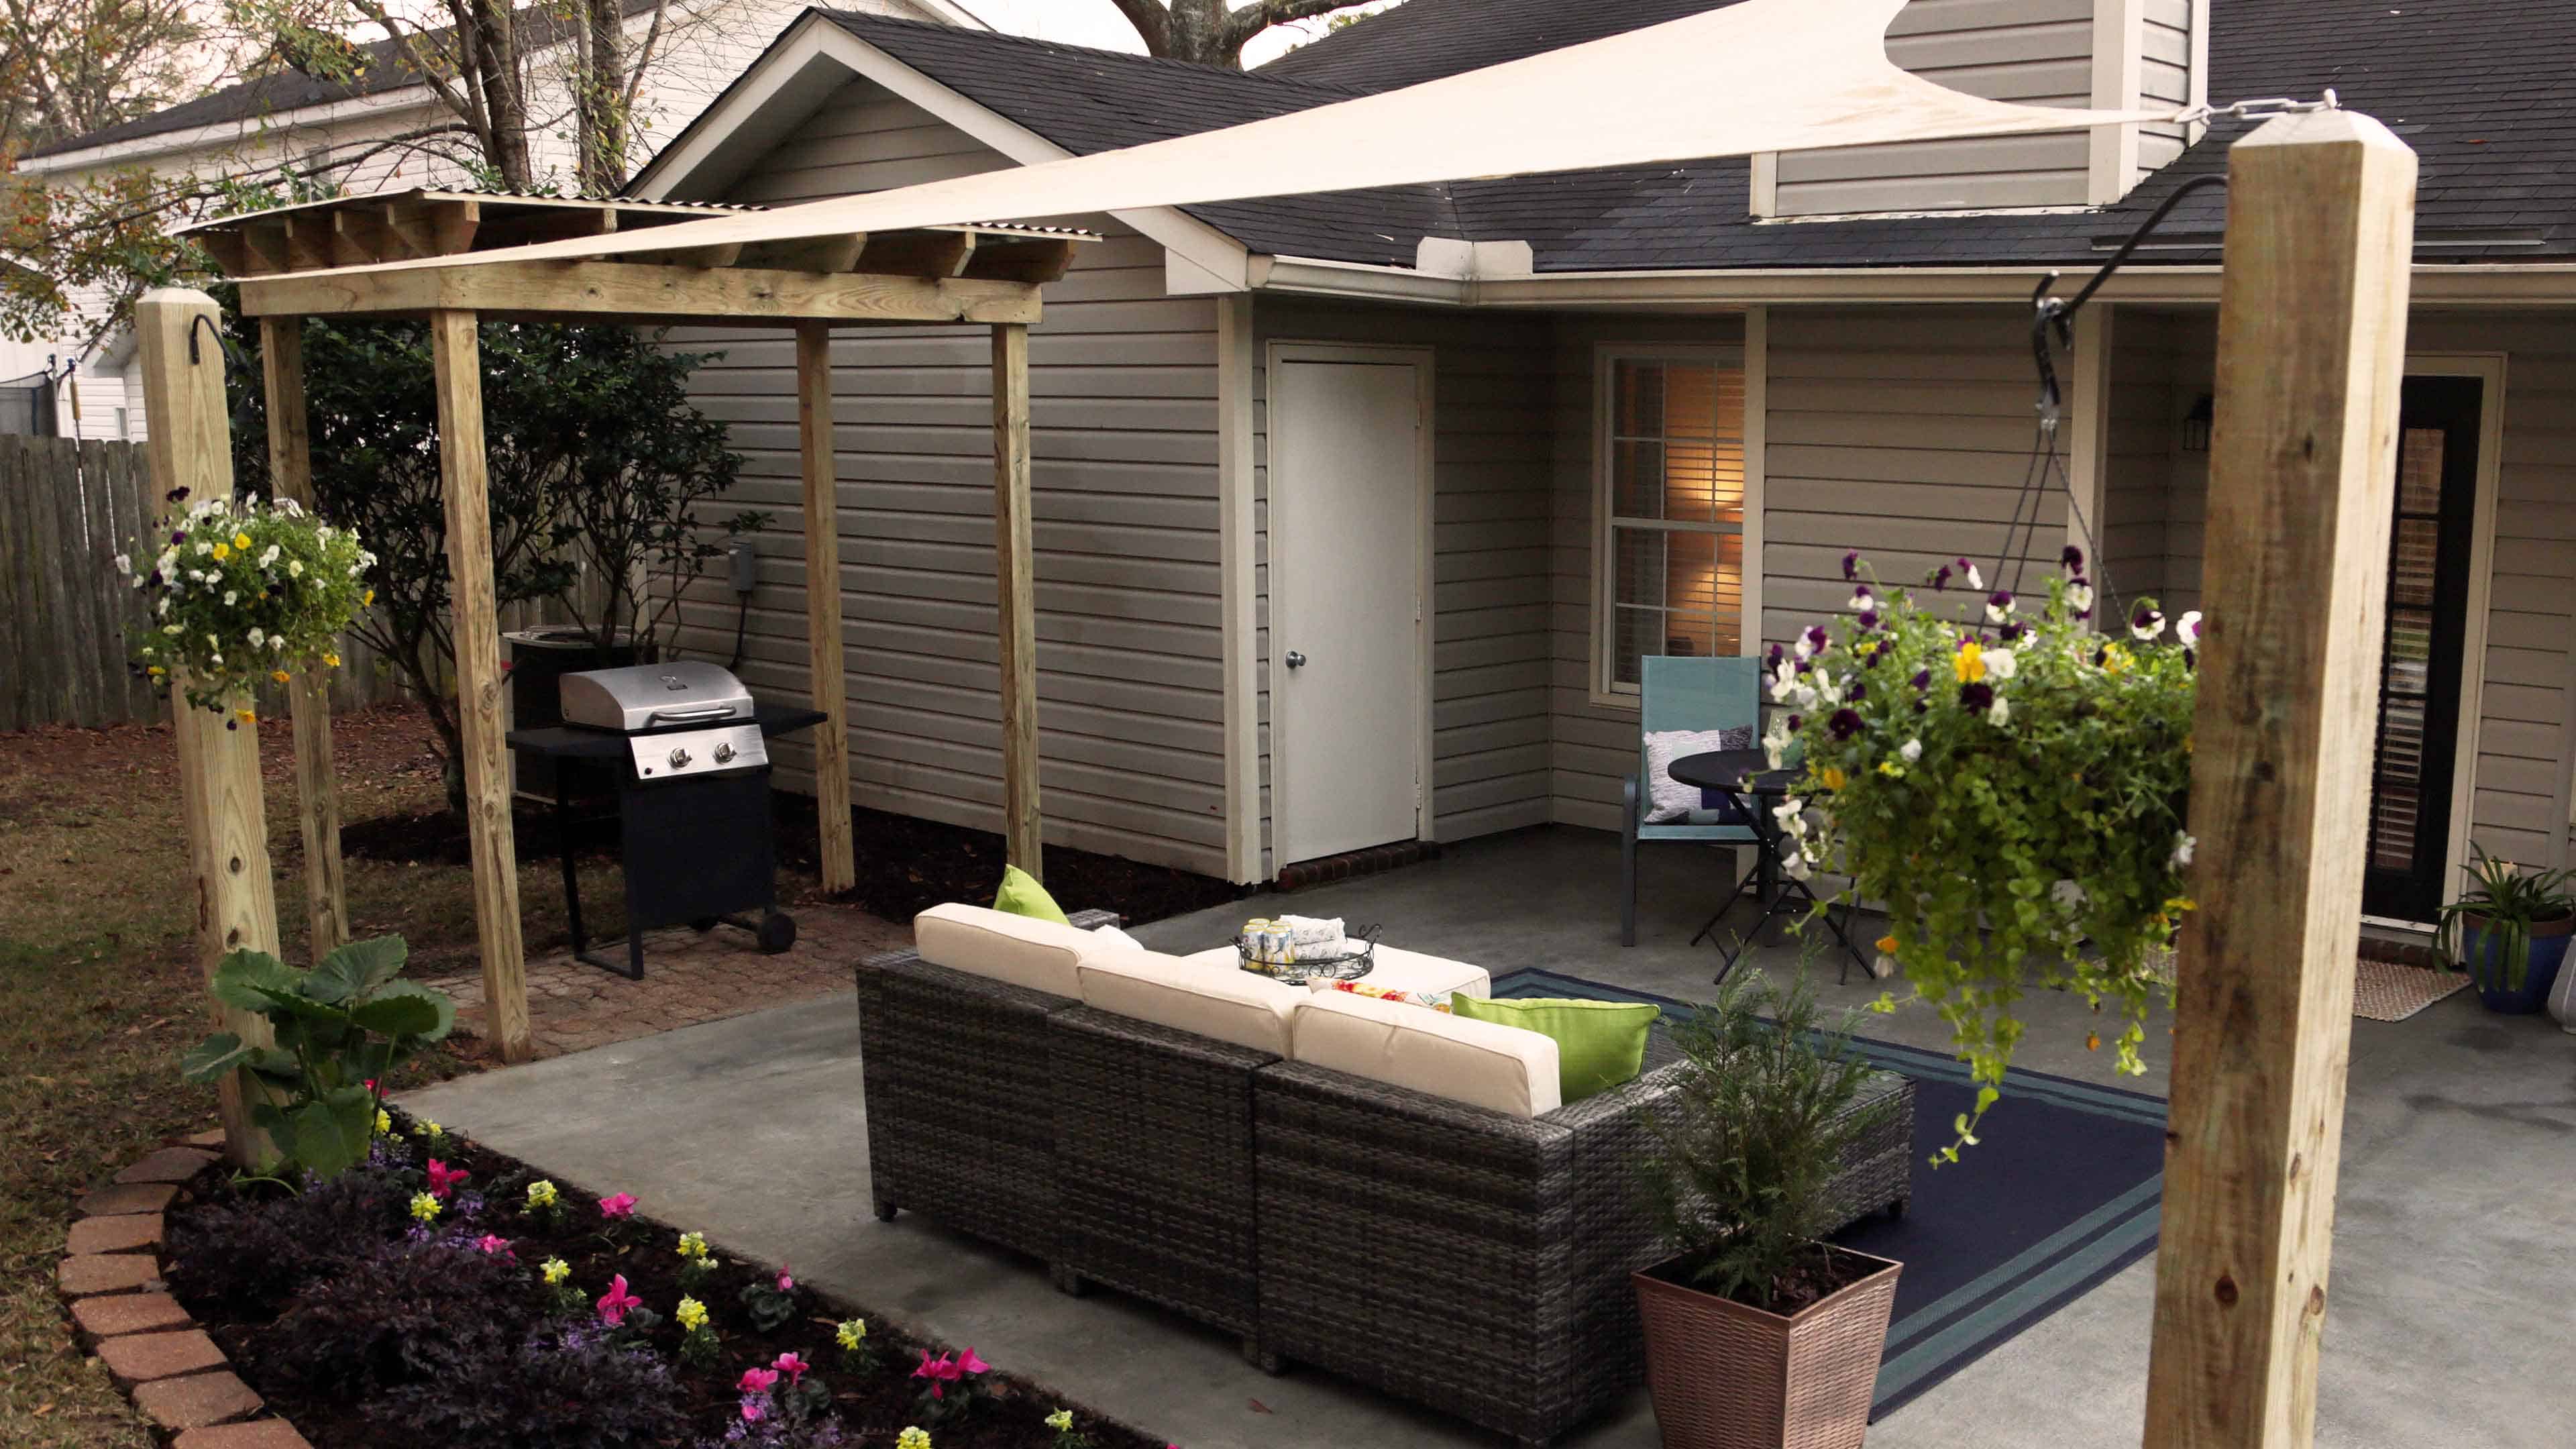 A canopy install is an easy way to provide cover for your outdoor kitchen.